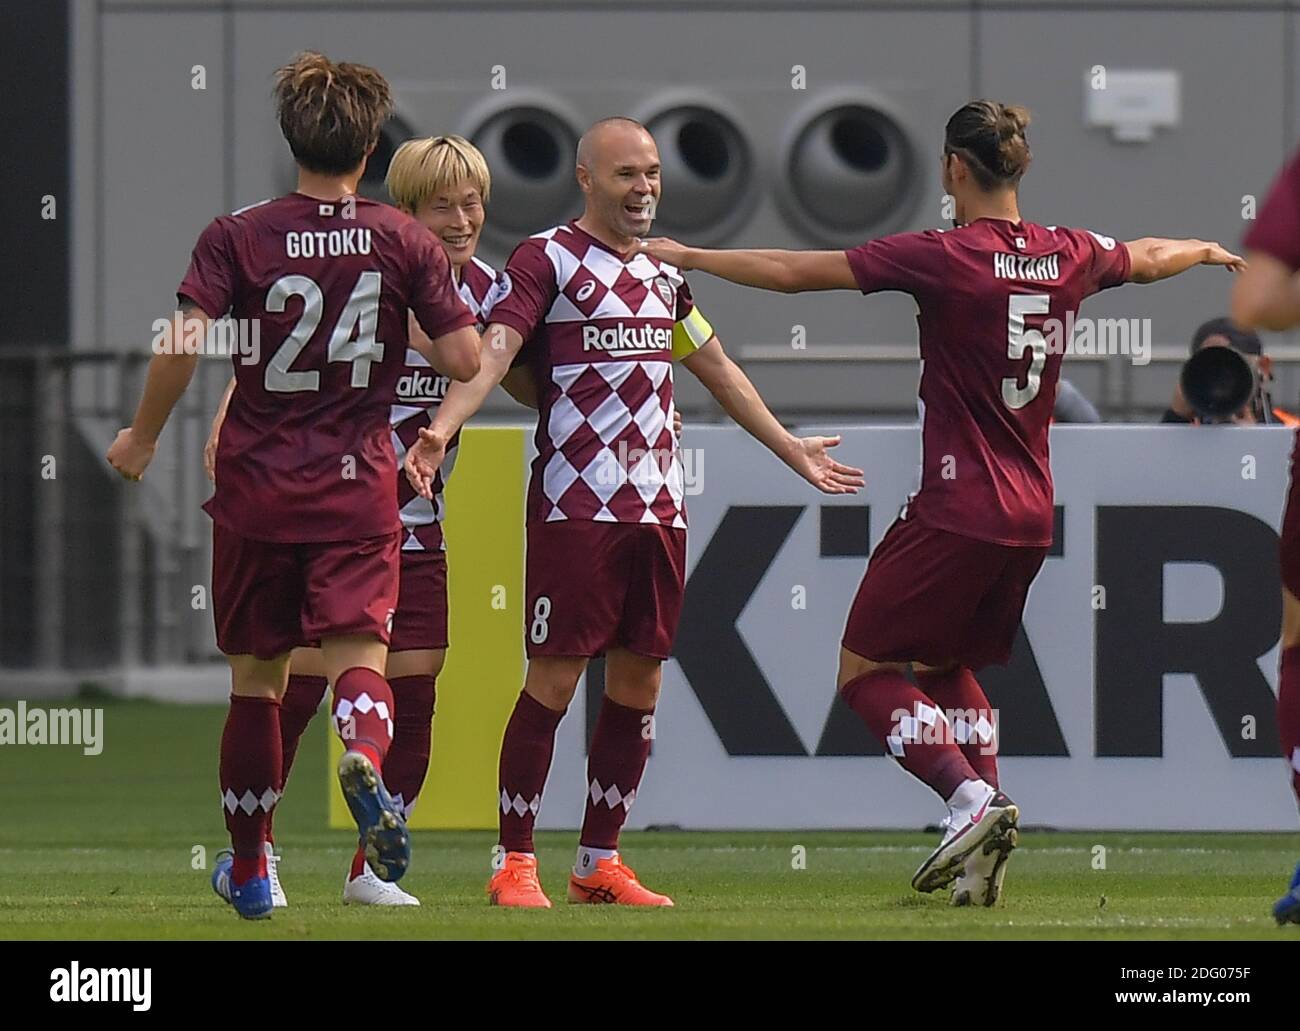 Doha, Qatar. 7th Dec, 2020. Andres Iniesta (2nd R) of Vissel Kobe celebrates his goal with teammates during the round of 16 match of the AFC Champions League between Shanghai SIPG FC of China and Vissel Kobe of Japan in Doha, Qatar, Dec. 7, 2020. Credit: Nikku/Xinhua/Alamy Live News Stock Photo